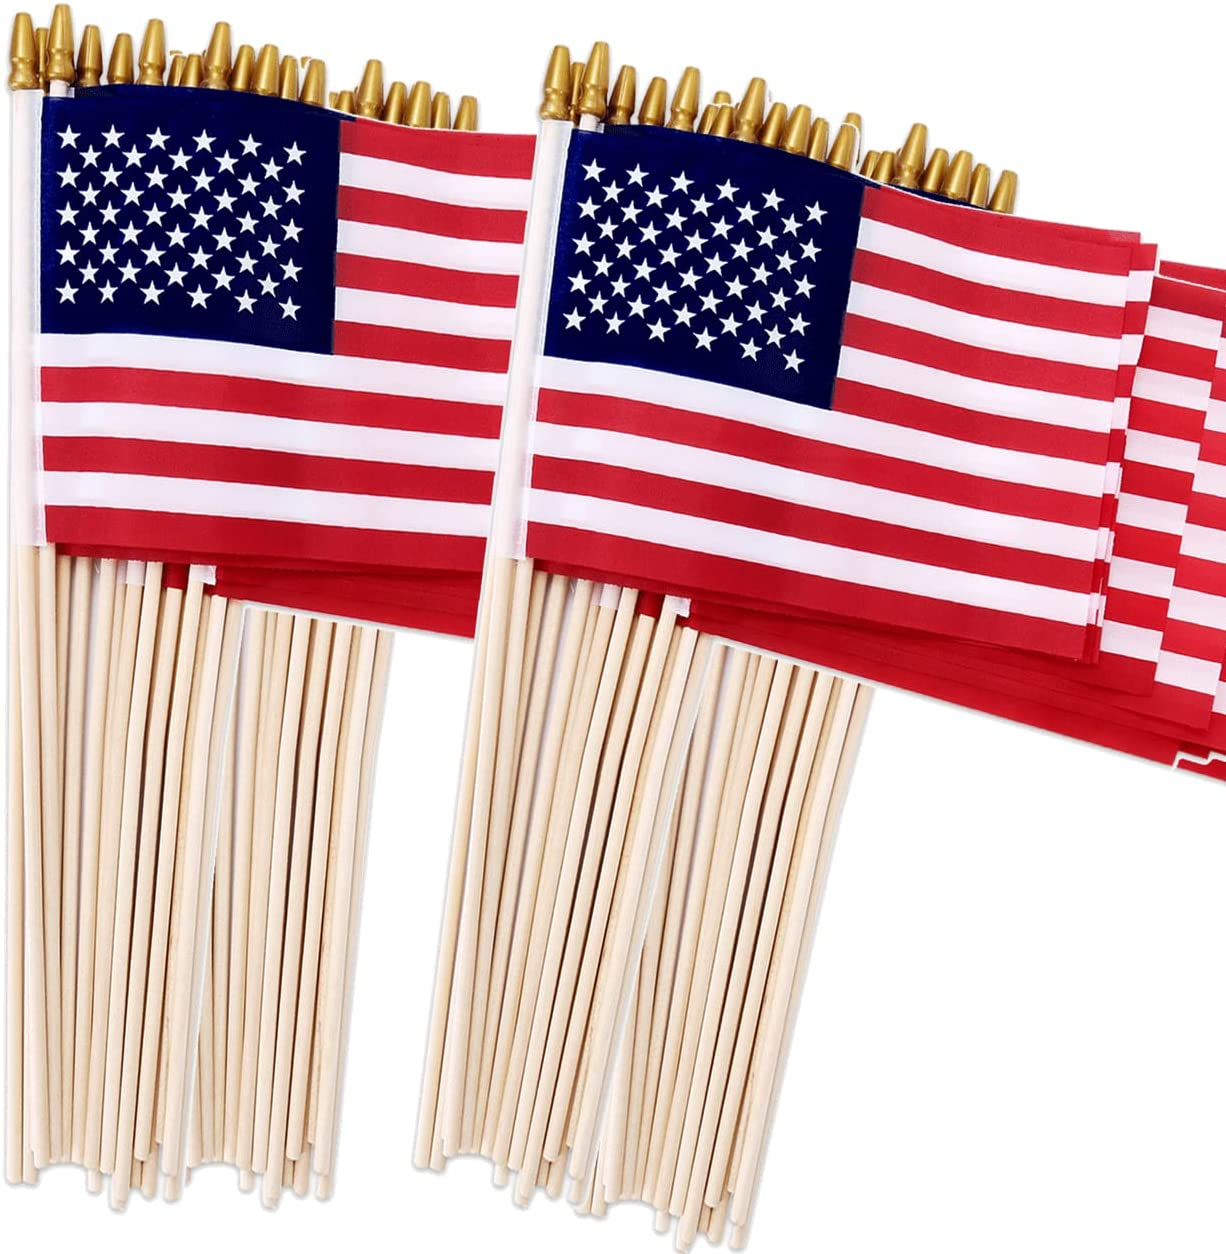 Multi-Pack - 4x6 Inch American Flags on Sticks